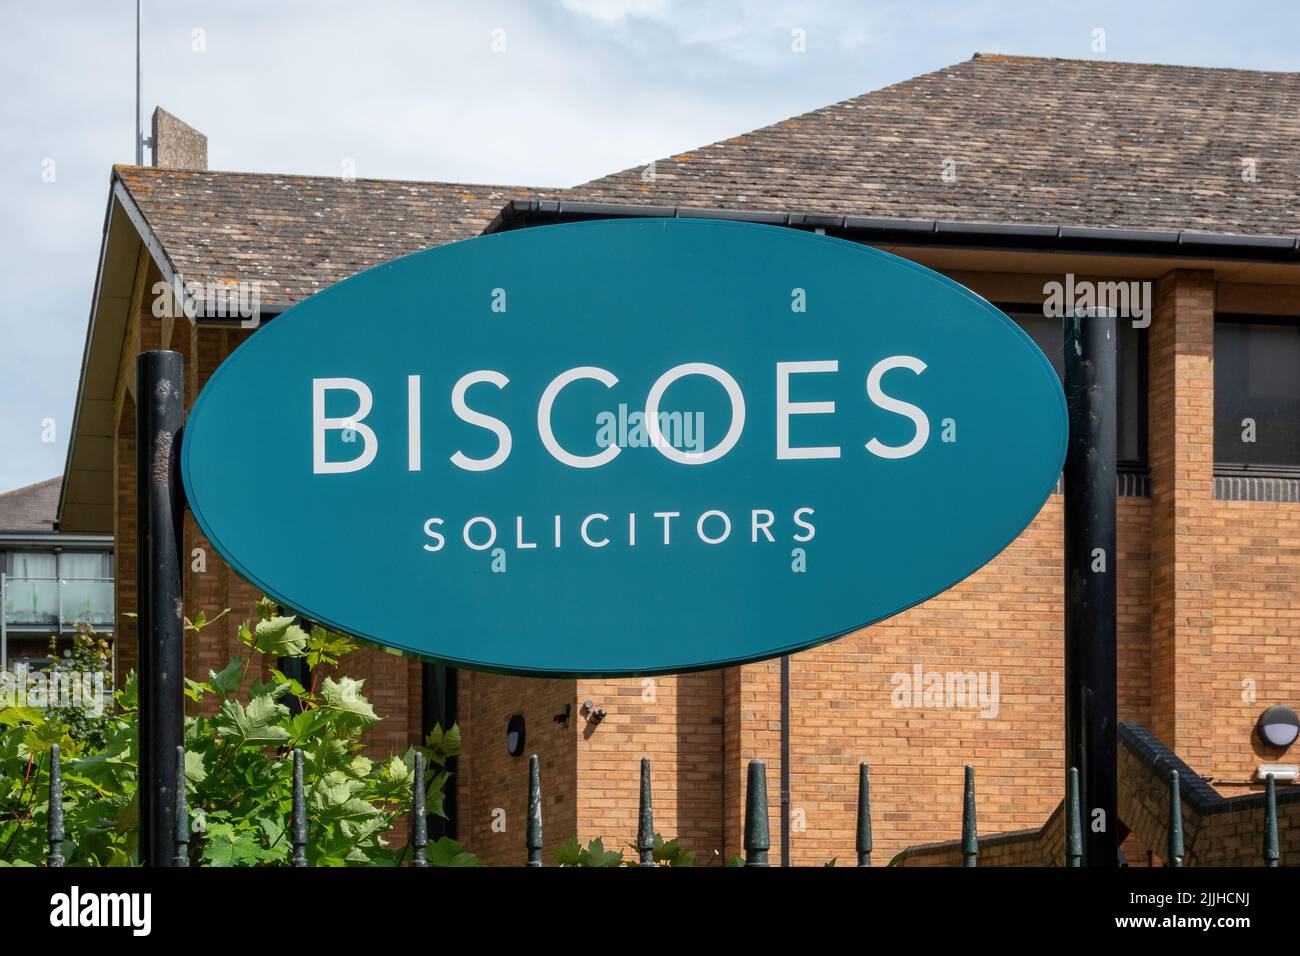 The sign at the entrance of Biscoes solicitors Stock Photo